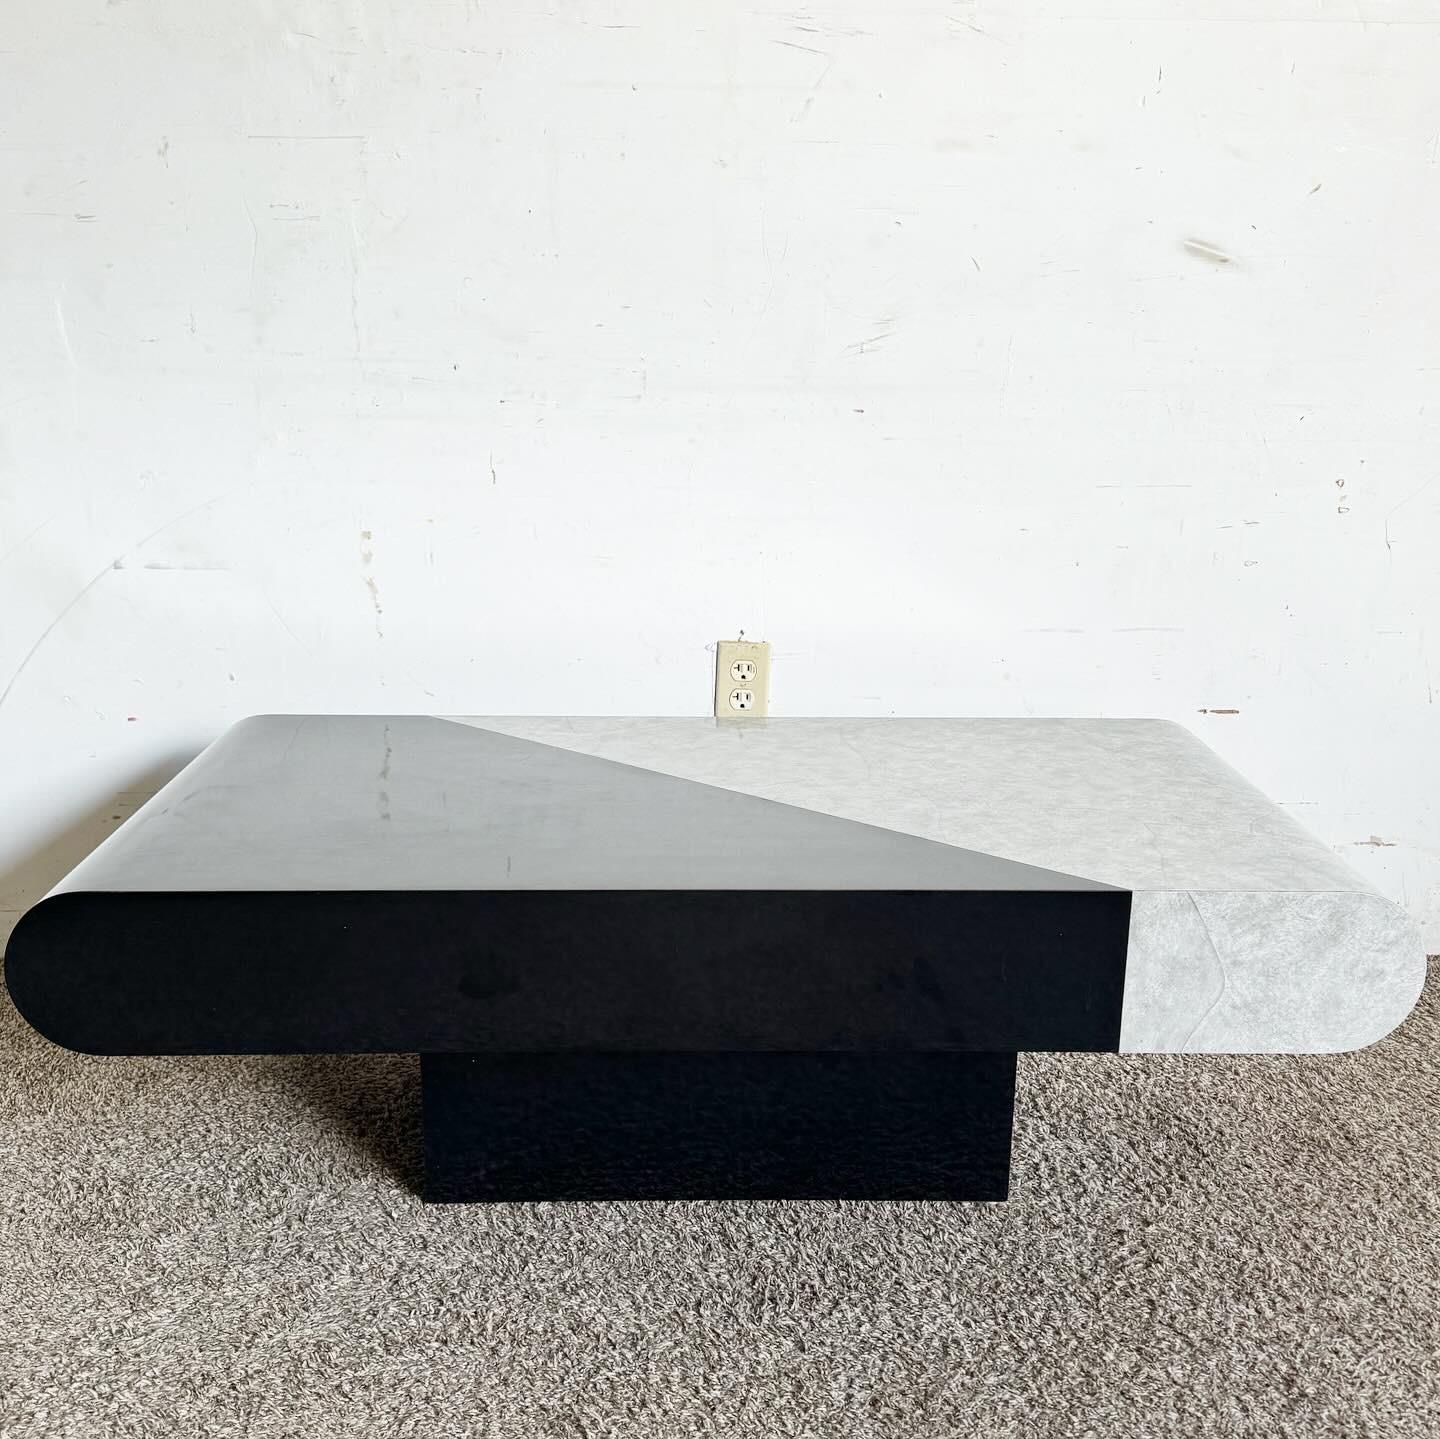 Postmodern Black Gloss and Faux Stone Laminate Bullnose Coffee Table In Good Condition For Sale In Delray Beach, FL